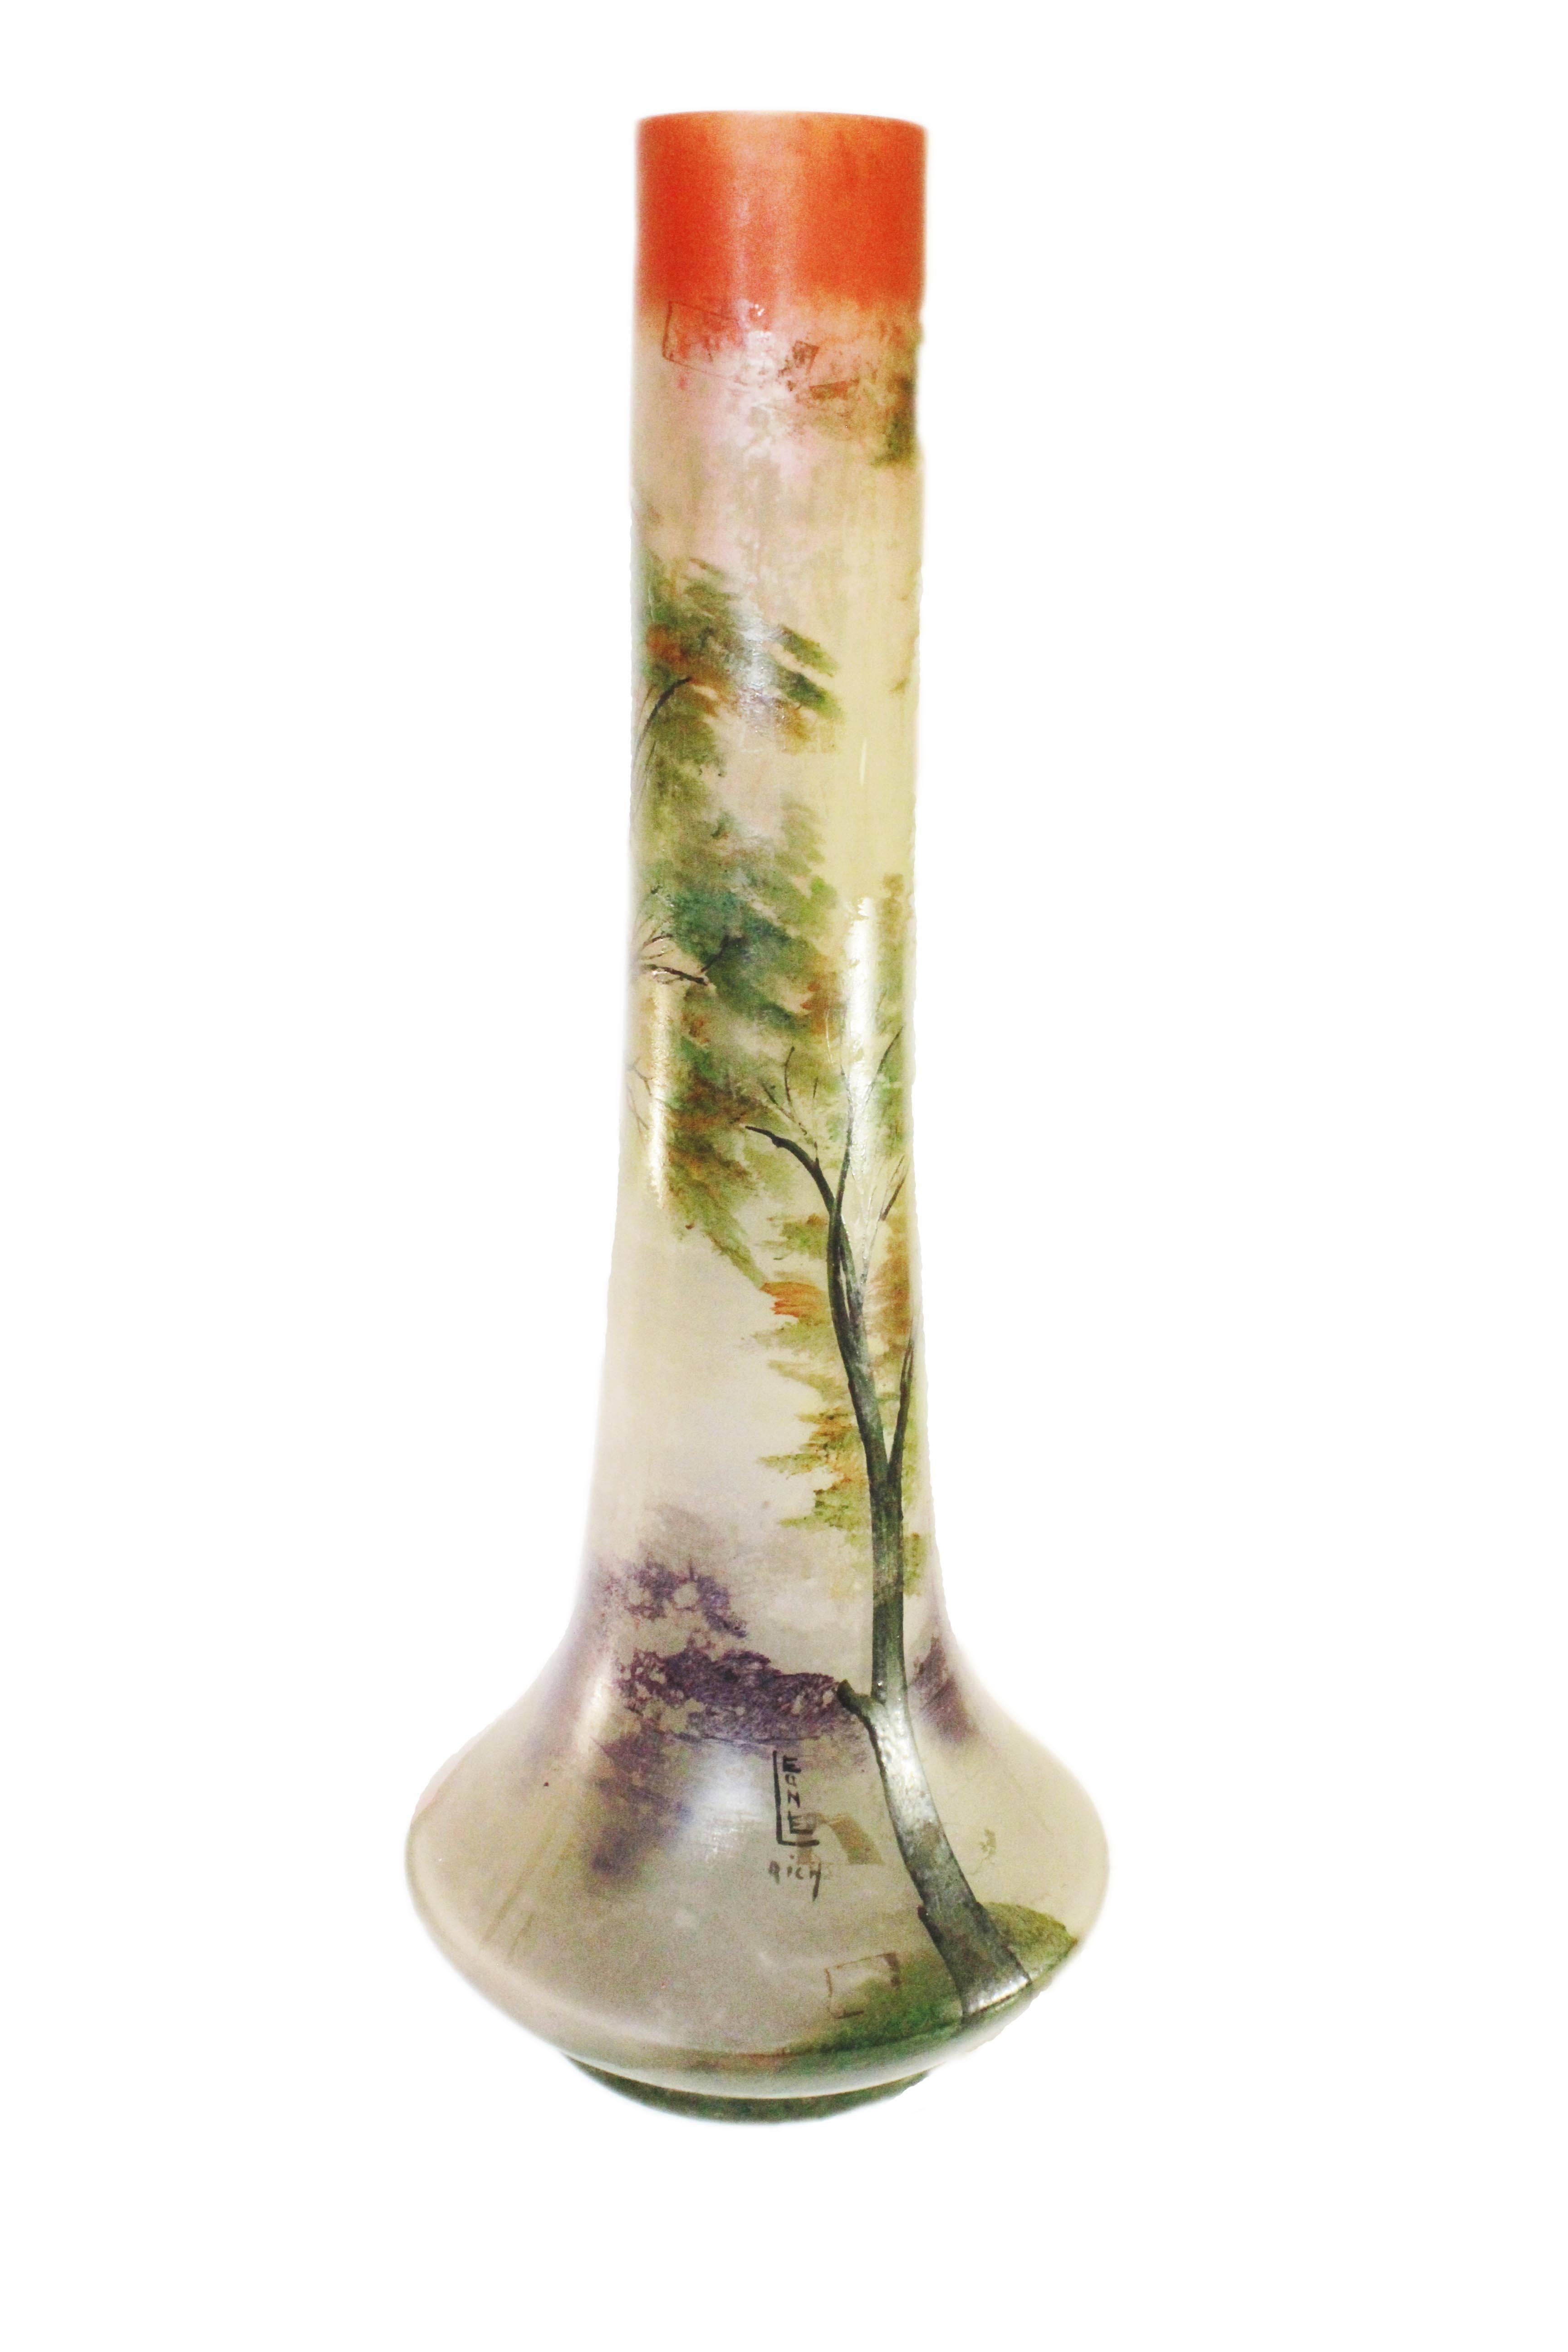 Signed Leune vase 19.5 cm high and 25 cm wide made of matted glass, decorated with a hand-painted enamel decoration. The decoration on the vase consists of an orange sunset (this is simulated by the neck) above a forest landscape in autumn colors.